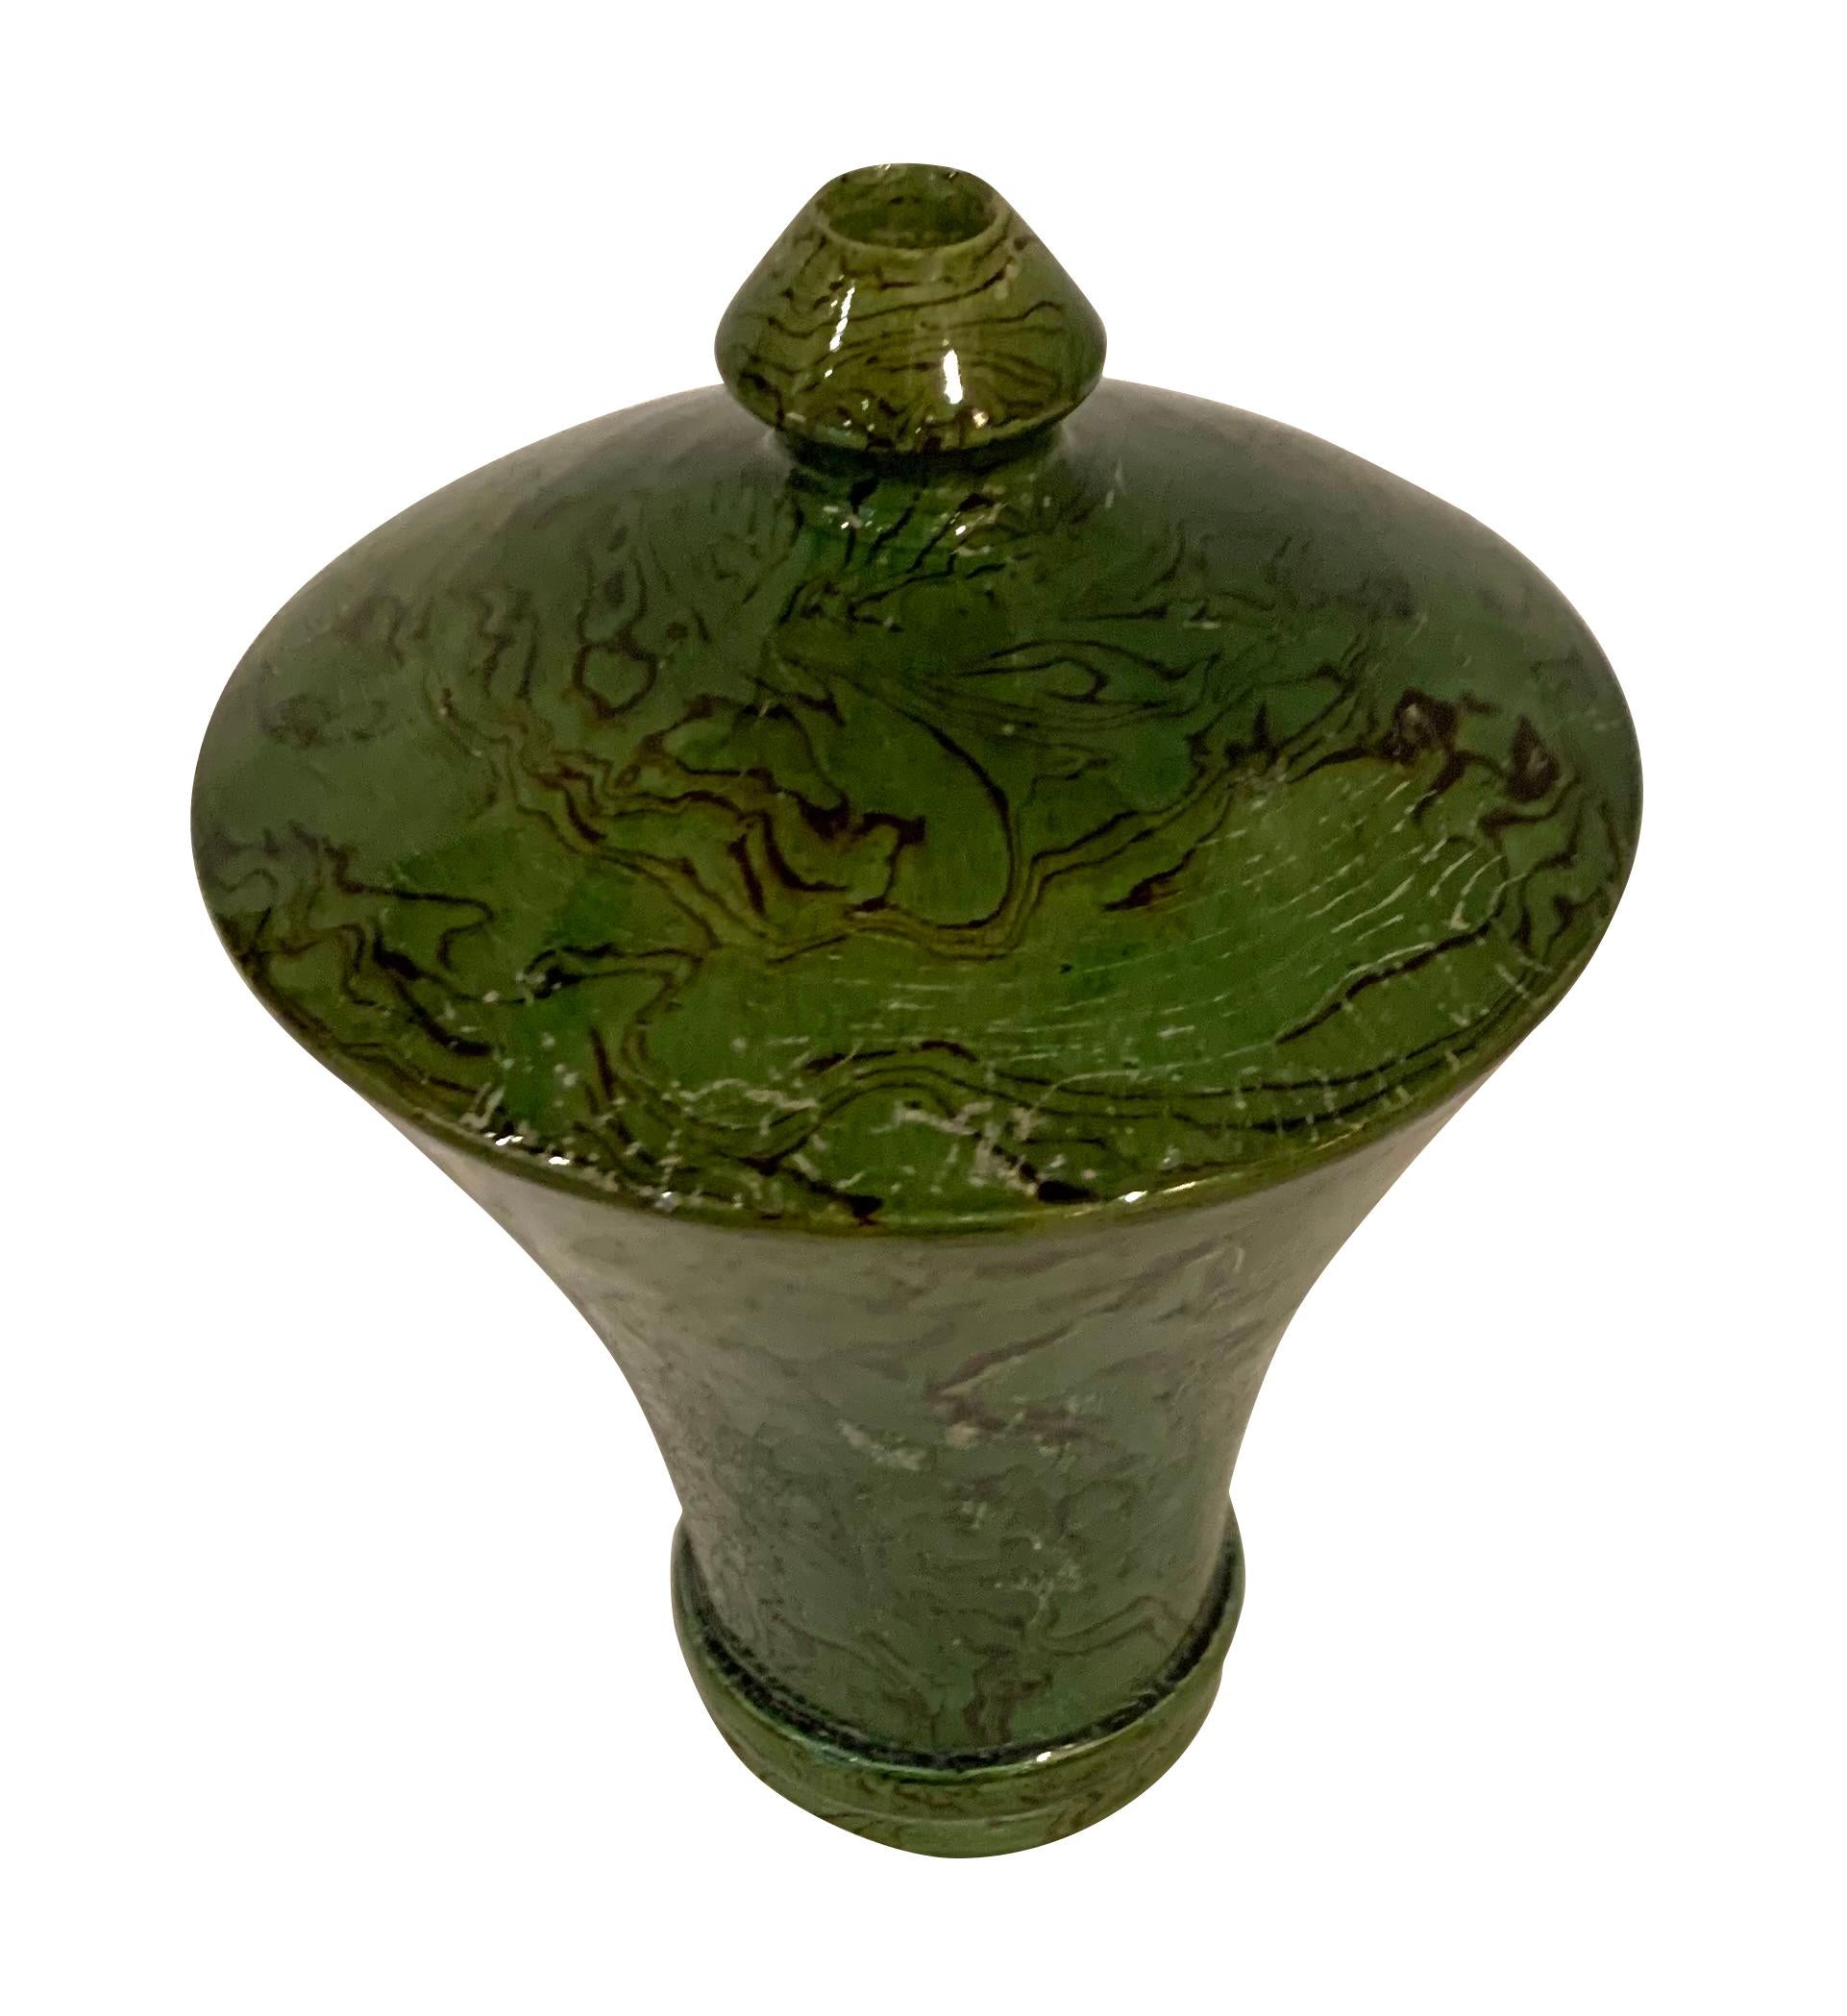 Contemporary Chinese malachite patterned vase.
Small spout opening.
